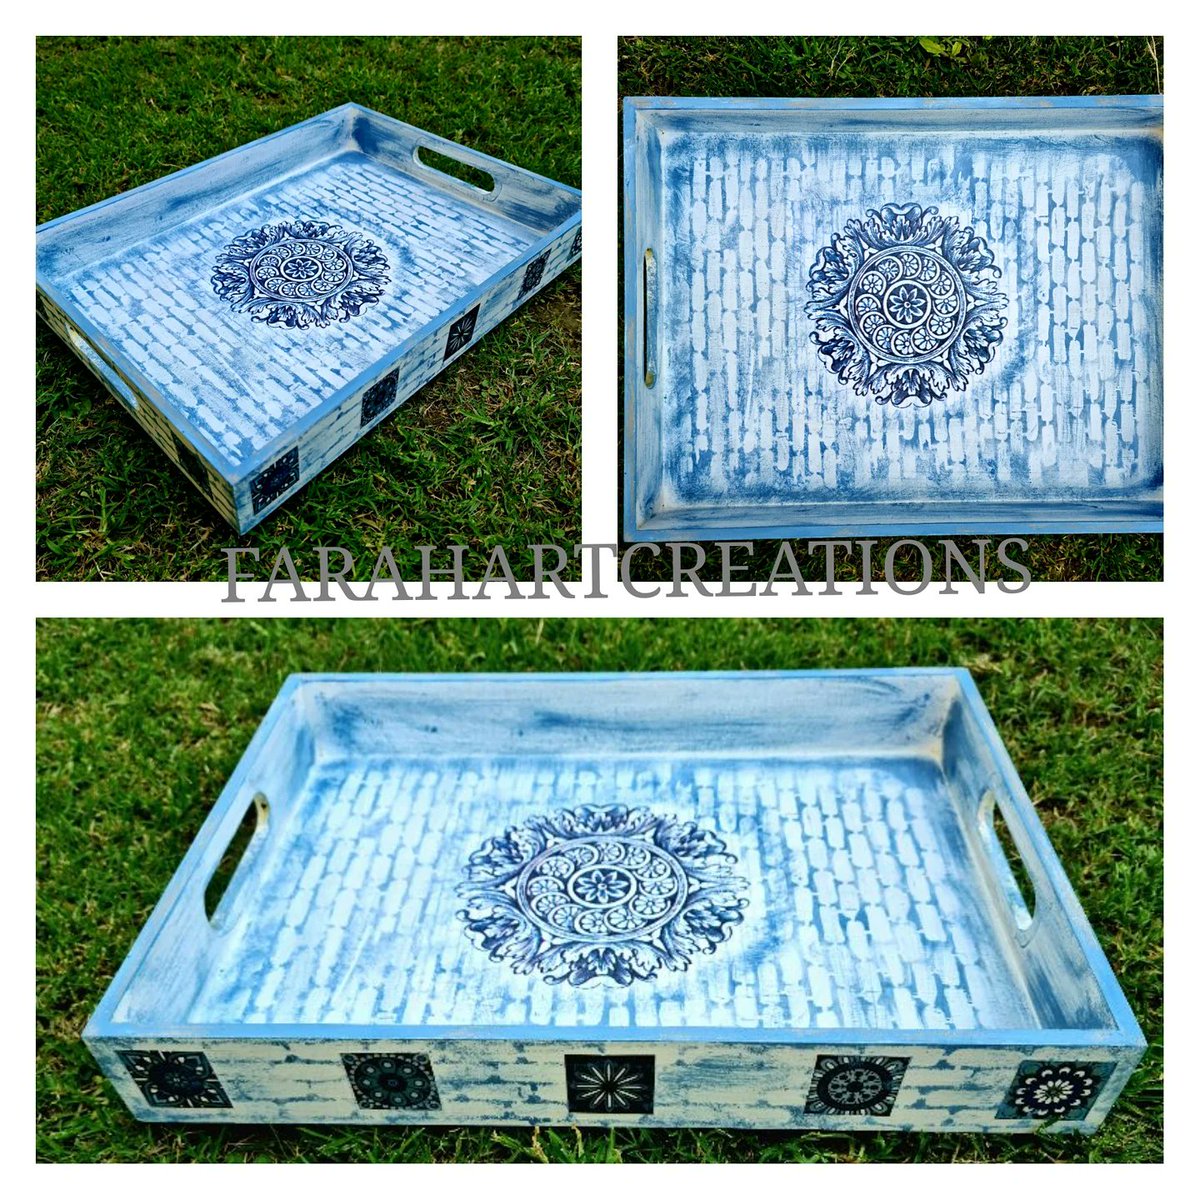 New addition to the range of Handcrafted  trays .
Size 12x9x1.5 inches.
Grab yours immediately. For orders please message directly 
#farahartcreations #trays #handpaintedtrays #customisedgiftsonline #onlinegiftshop #handmadegifts  #homedecor #rakhi #handmade #vocalforlocal